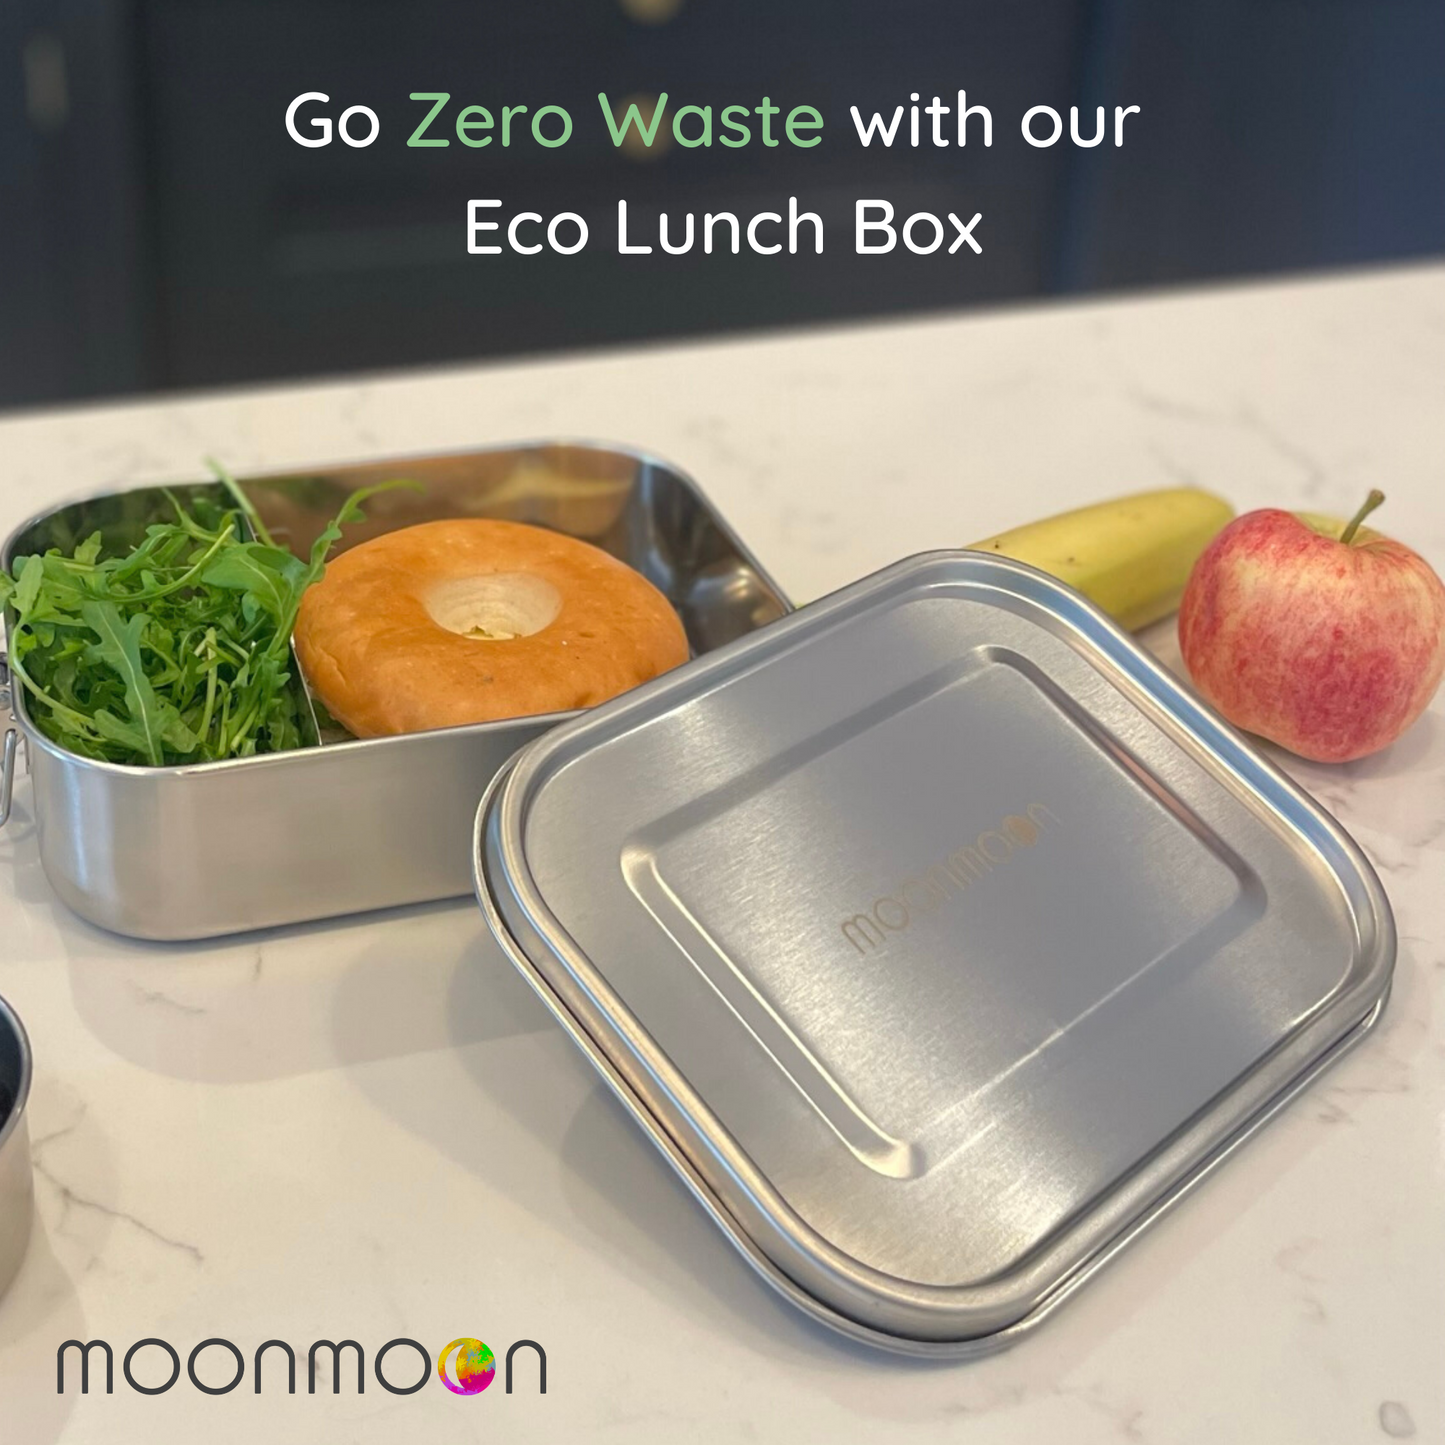 Moonmoon stainless steel lunch box with compartments, Reusable, Eco-friendly, bento box, bento boxes, best stainless steel lunch box, lunch box metal, lunch boxes with compartments, metal lunch box with compartments,